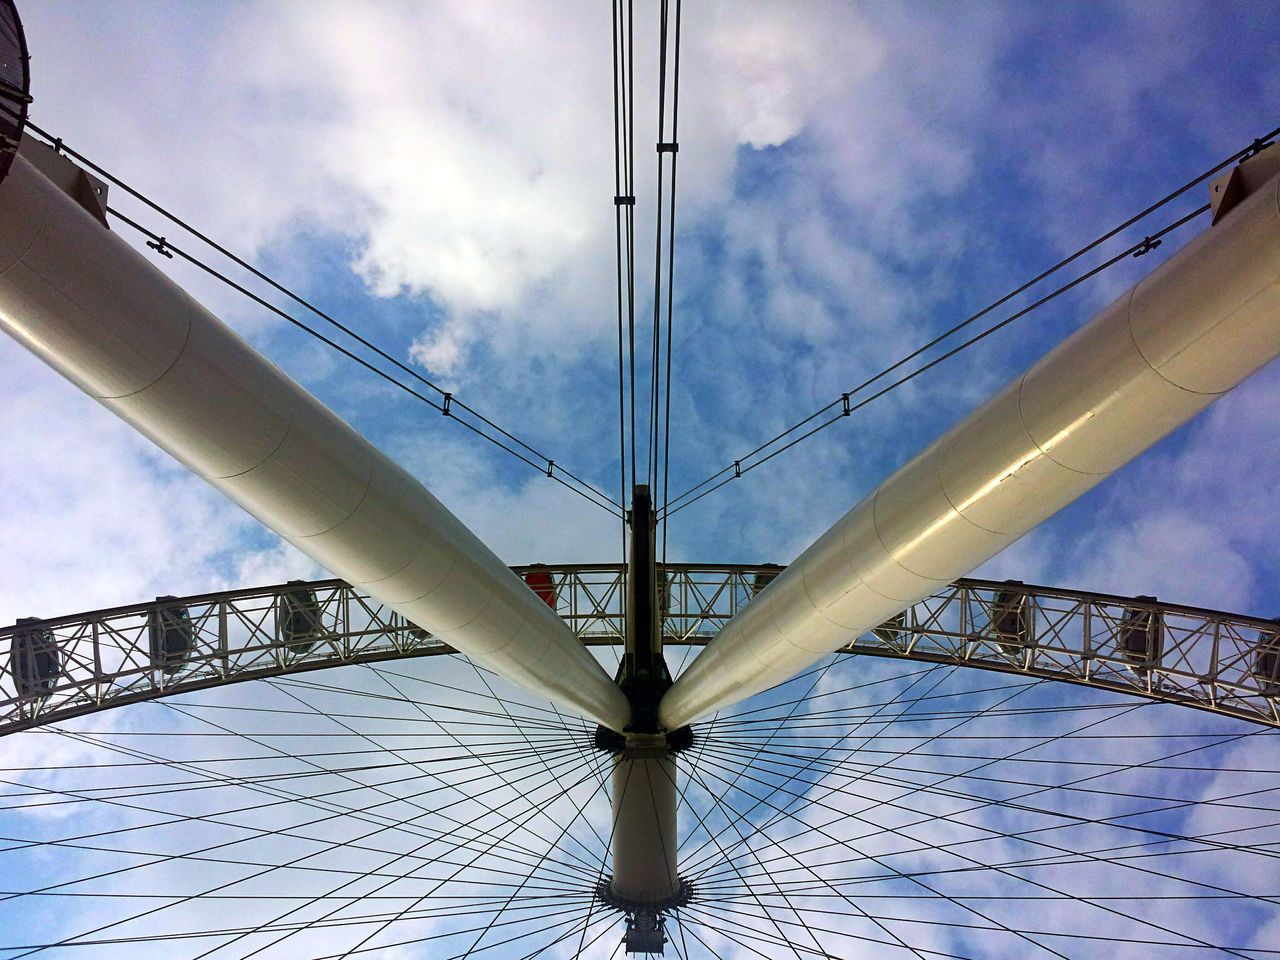 low angle view, connection, sky, engineering, built structure, architecture, bridge - man made structure, cloud - sky, suspension bridge, steel cable, transportation, cloud, cloudy, metal, cable-stayed bridge, cable, bridge, day, famous place, outdoors